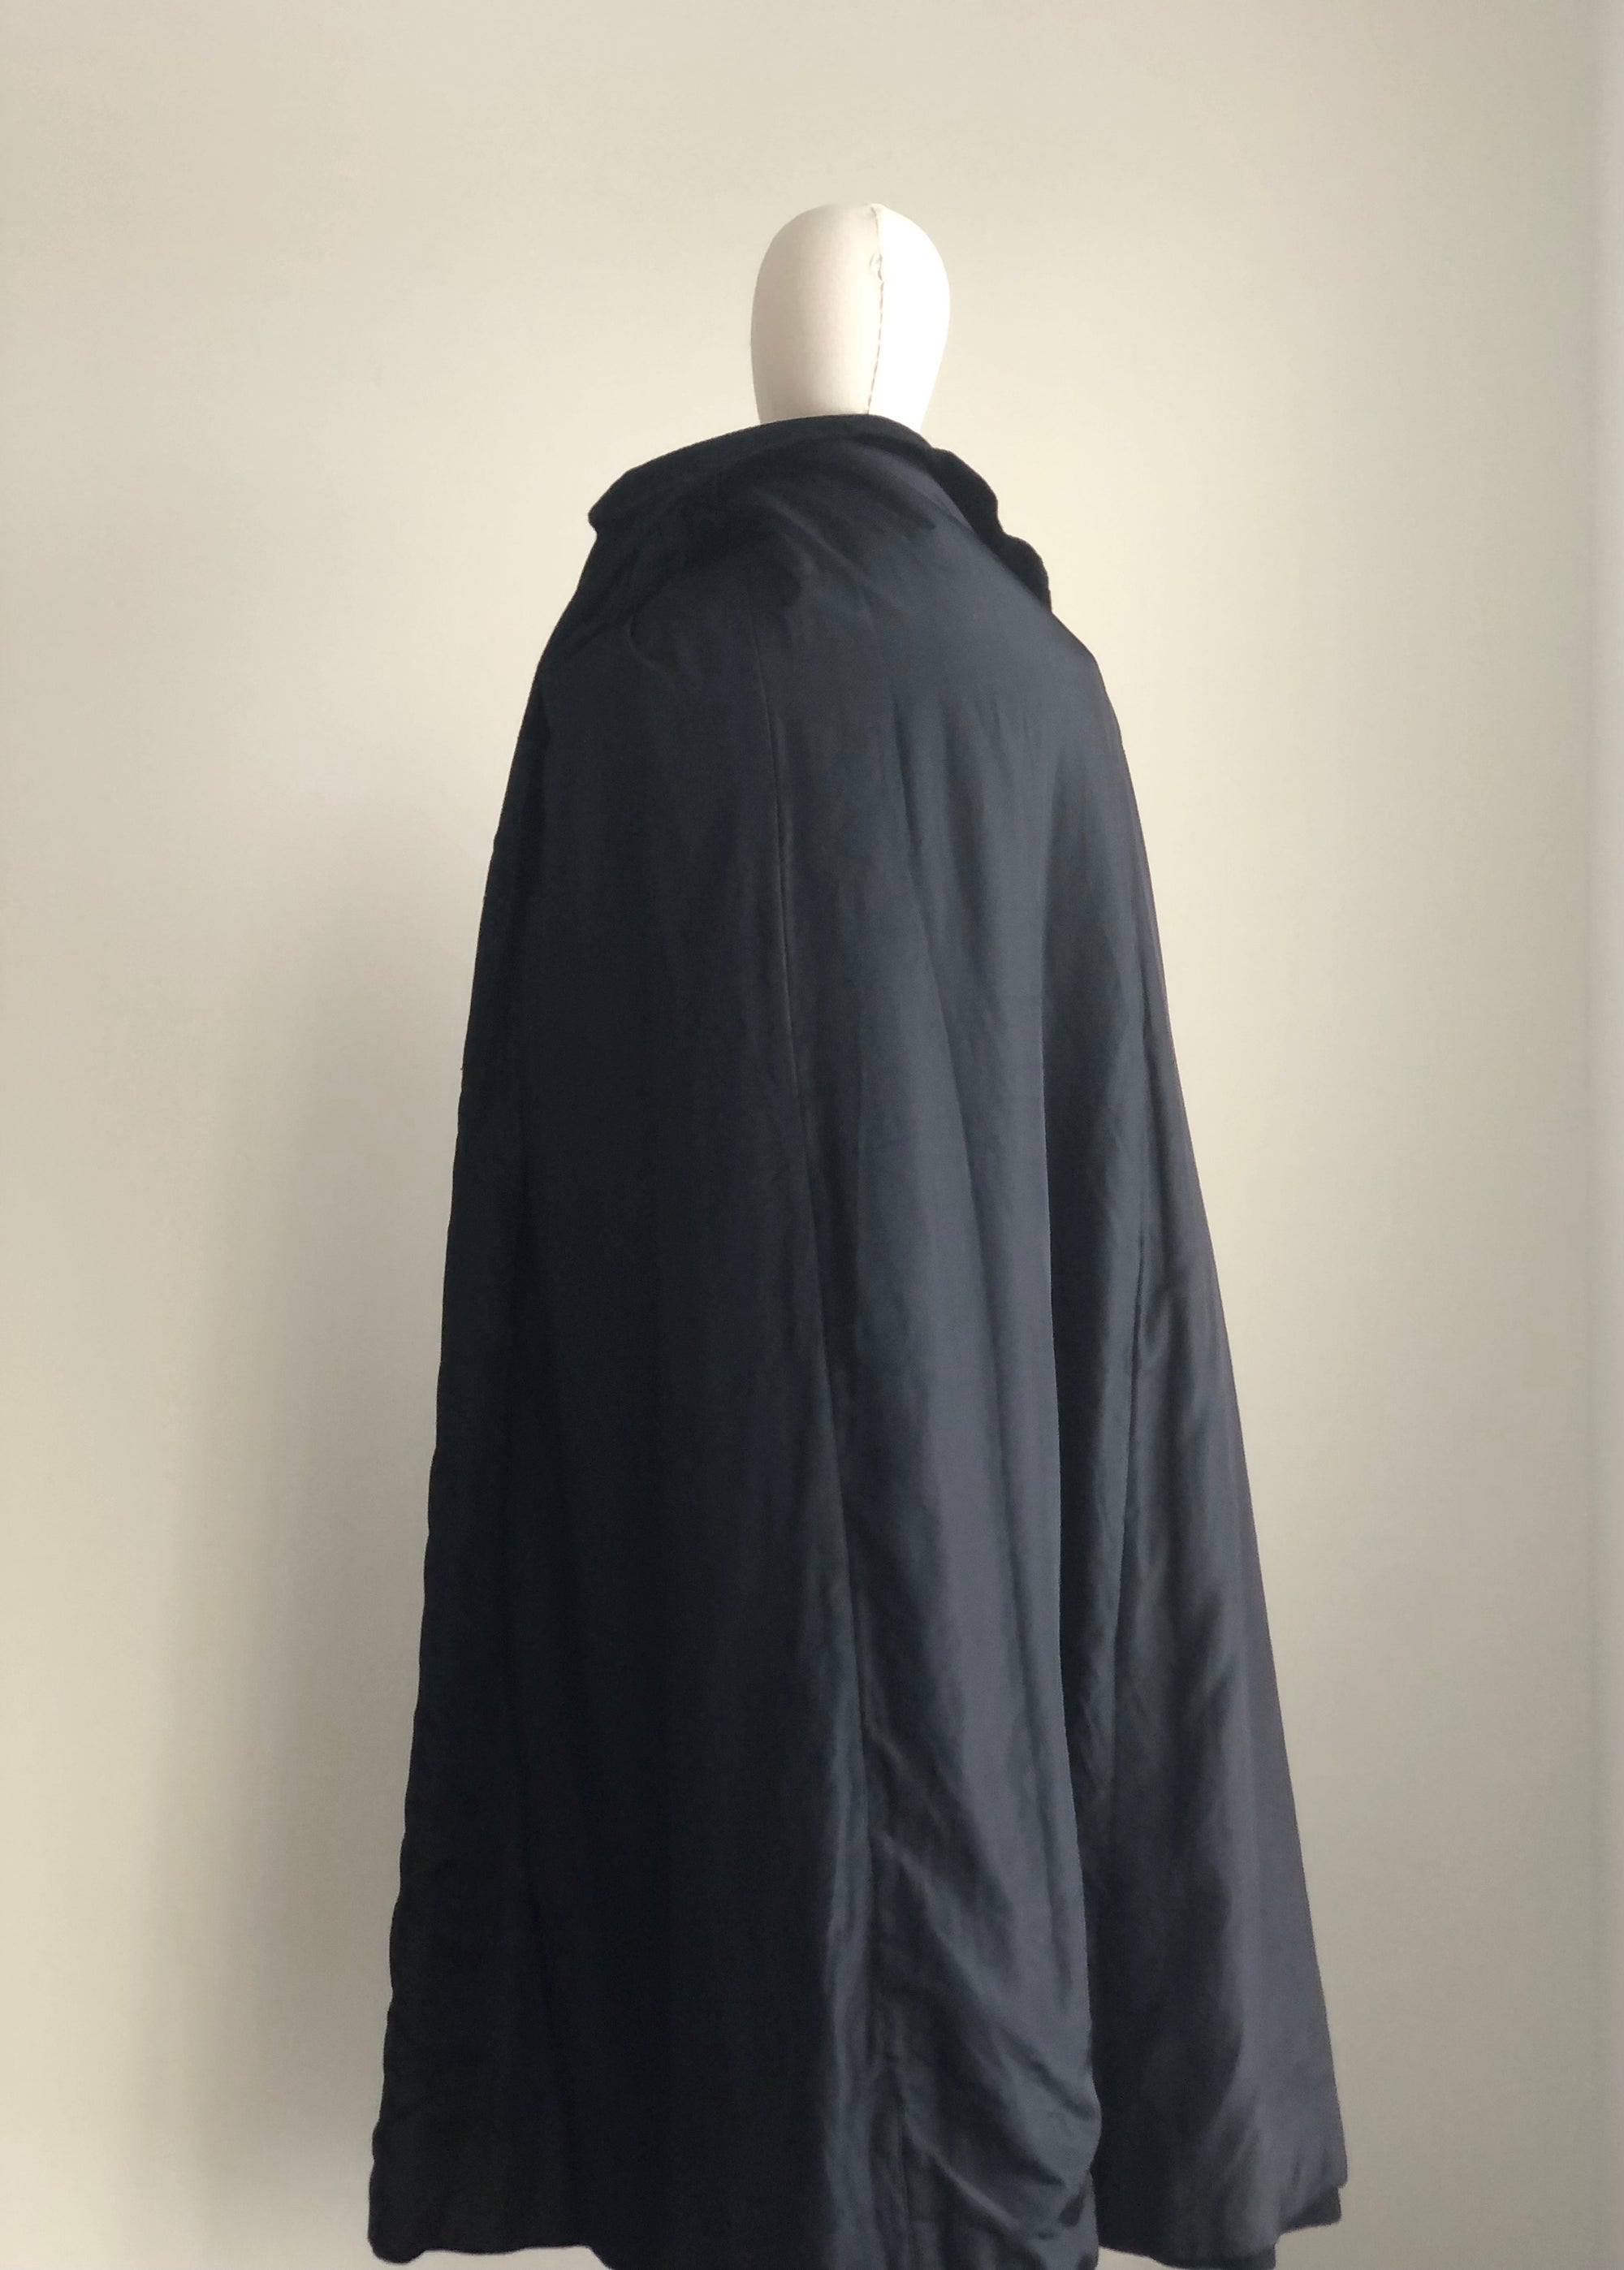 1940s Black Wool Cape with Gold Appliqué Shoulders ONE SIZE